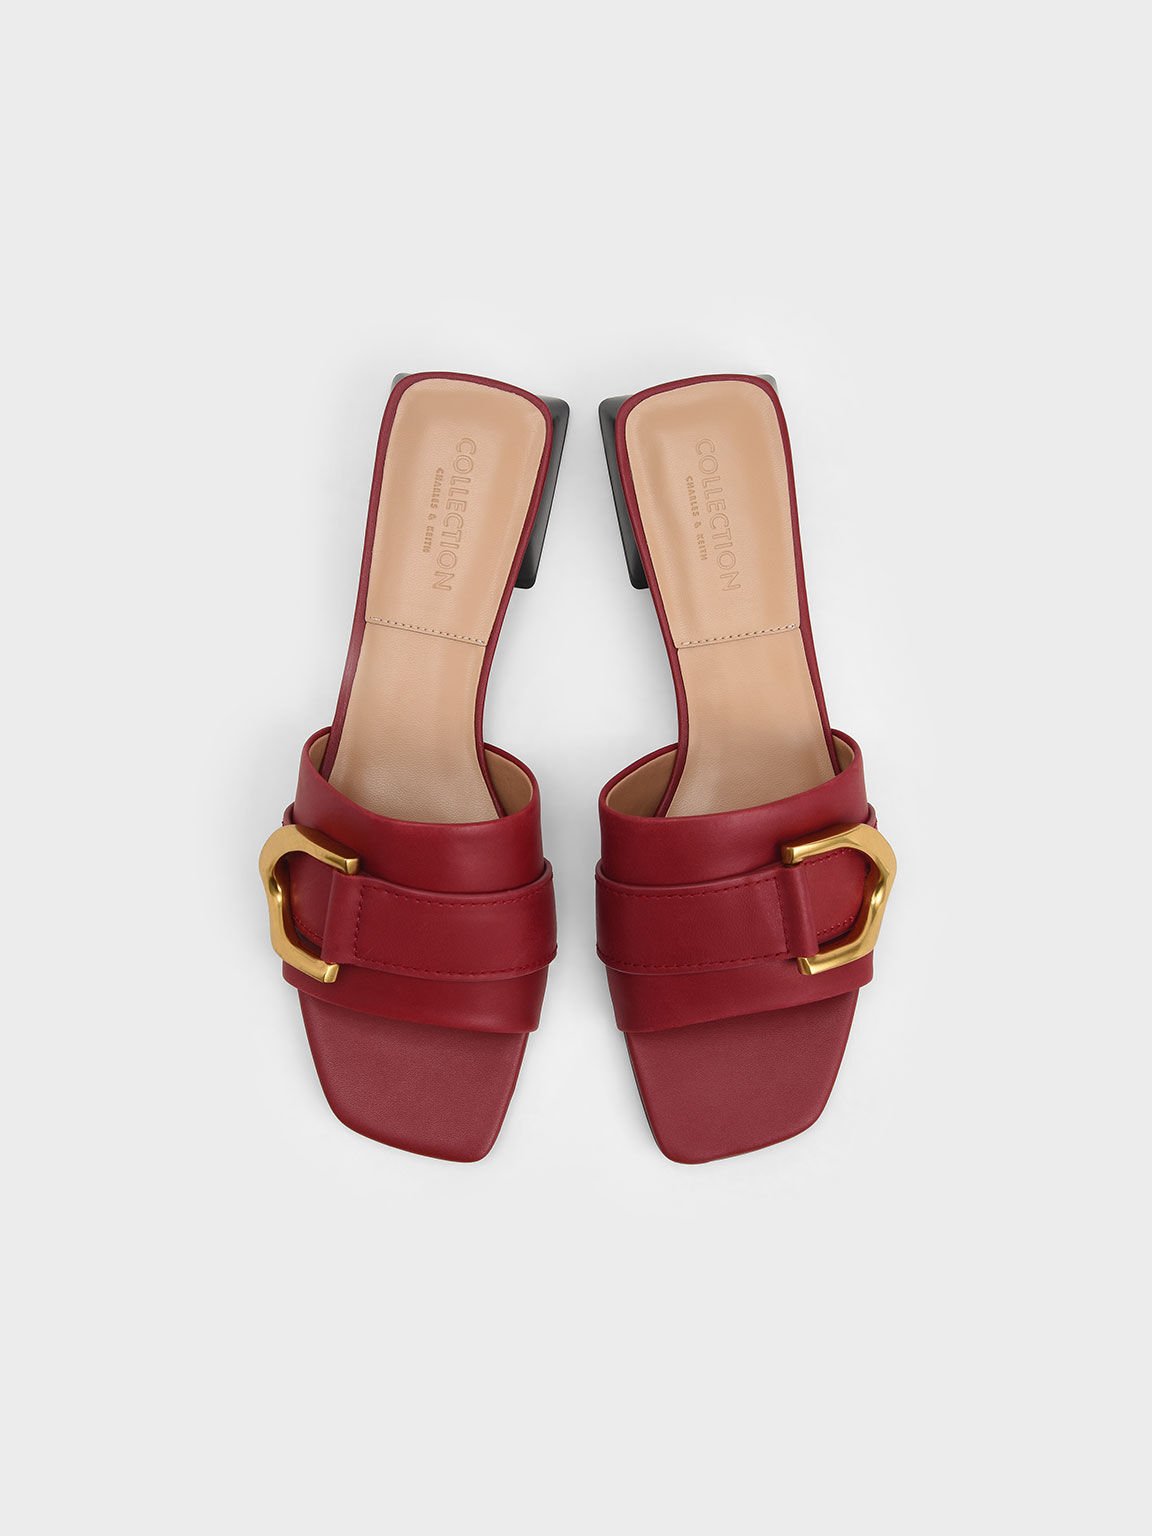 Gabine Buckled Leather Mules, Red, hi-res